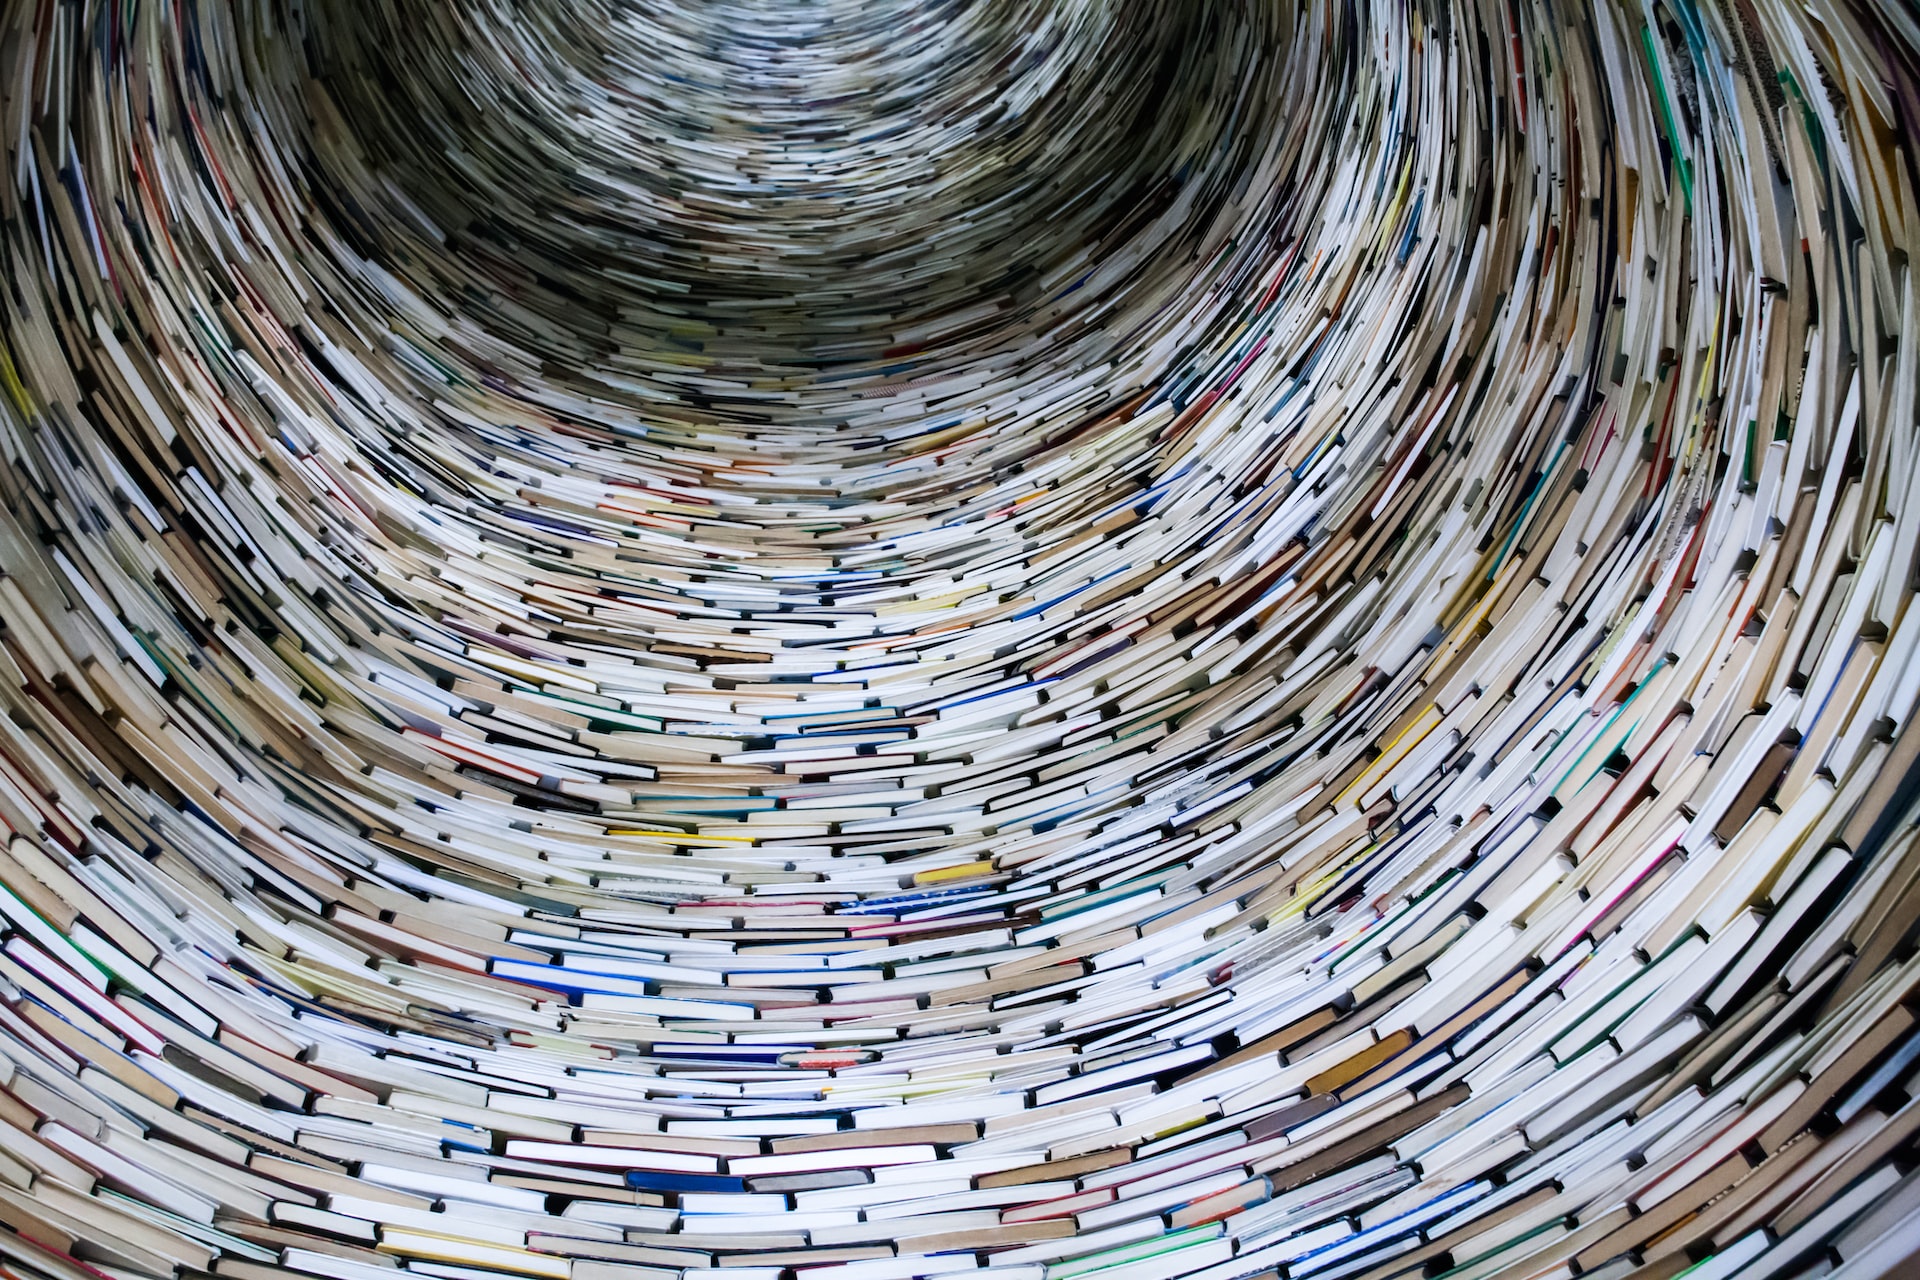 Books in the form of a round 